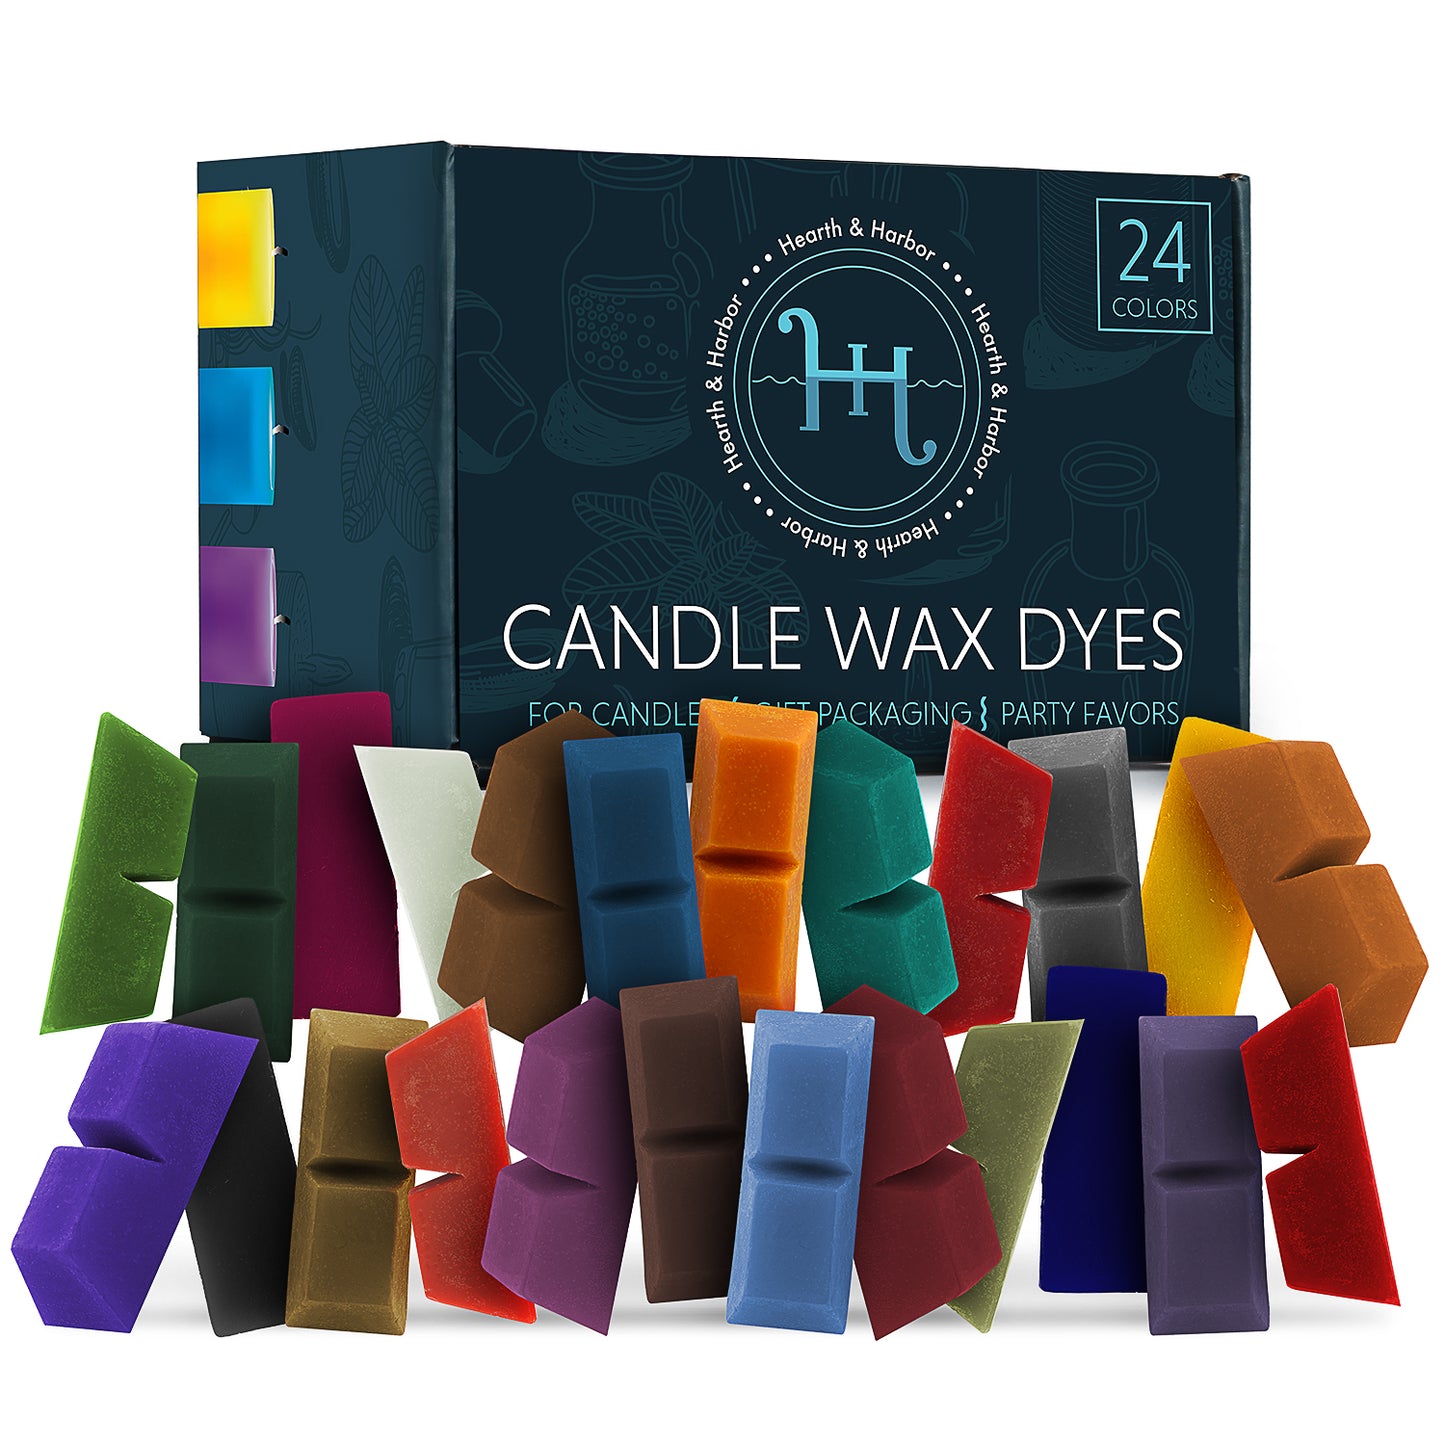 Wax Dye 8 Colors, Color Blocks for Candle Making, Soy Wax Dye Flakes,  Colorant